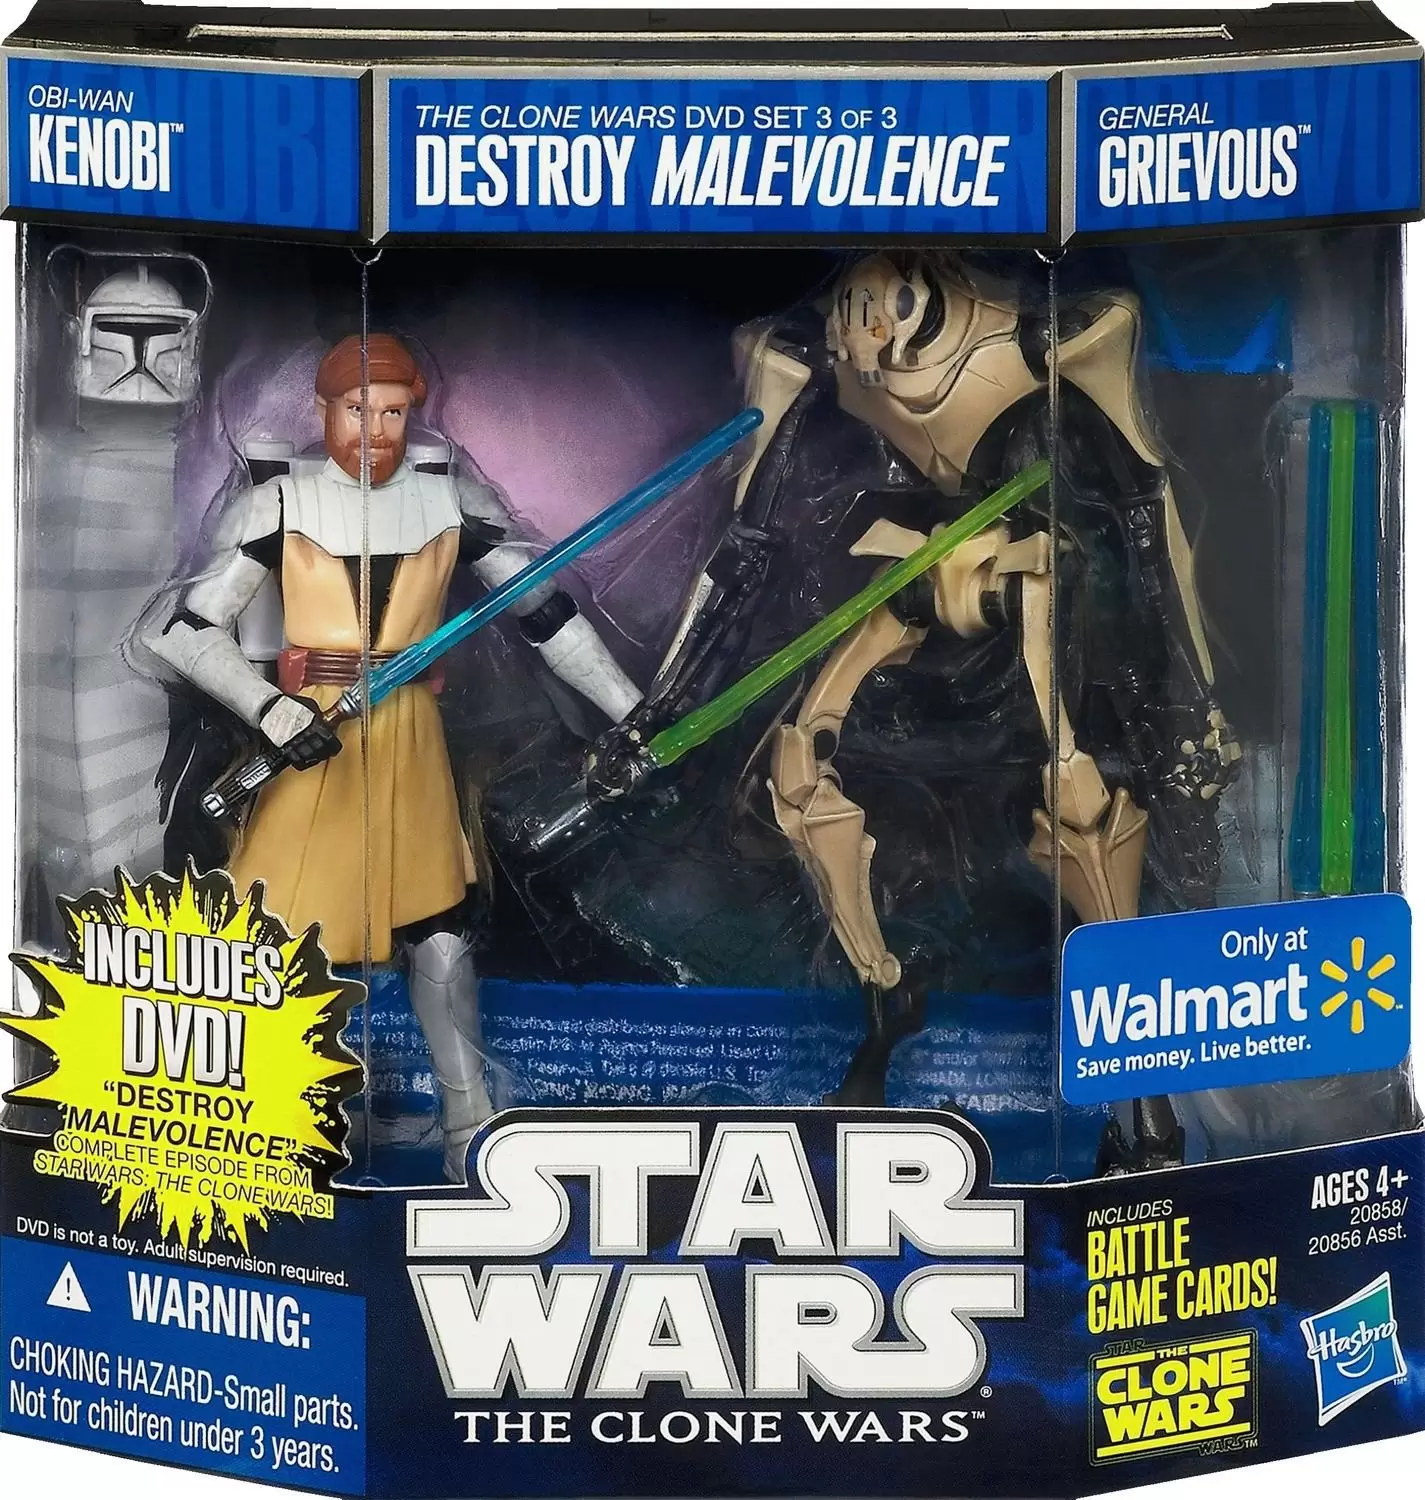 The Clone Wars - Shadow of the Dark Side - THE CLONE WARS DVD SET 3 of 3 DESTROY MALEVOLENCE